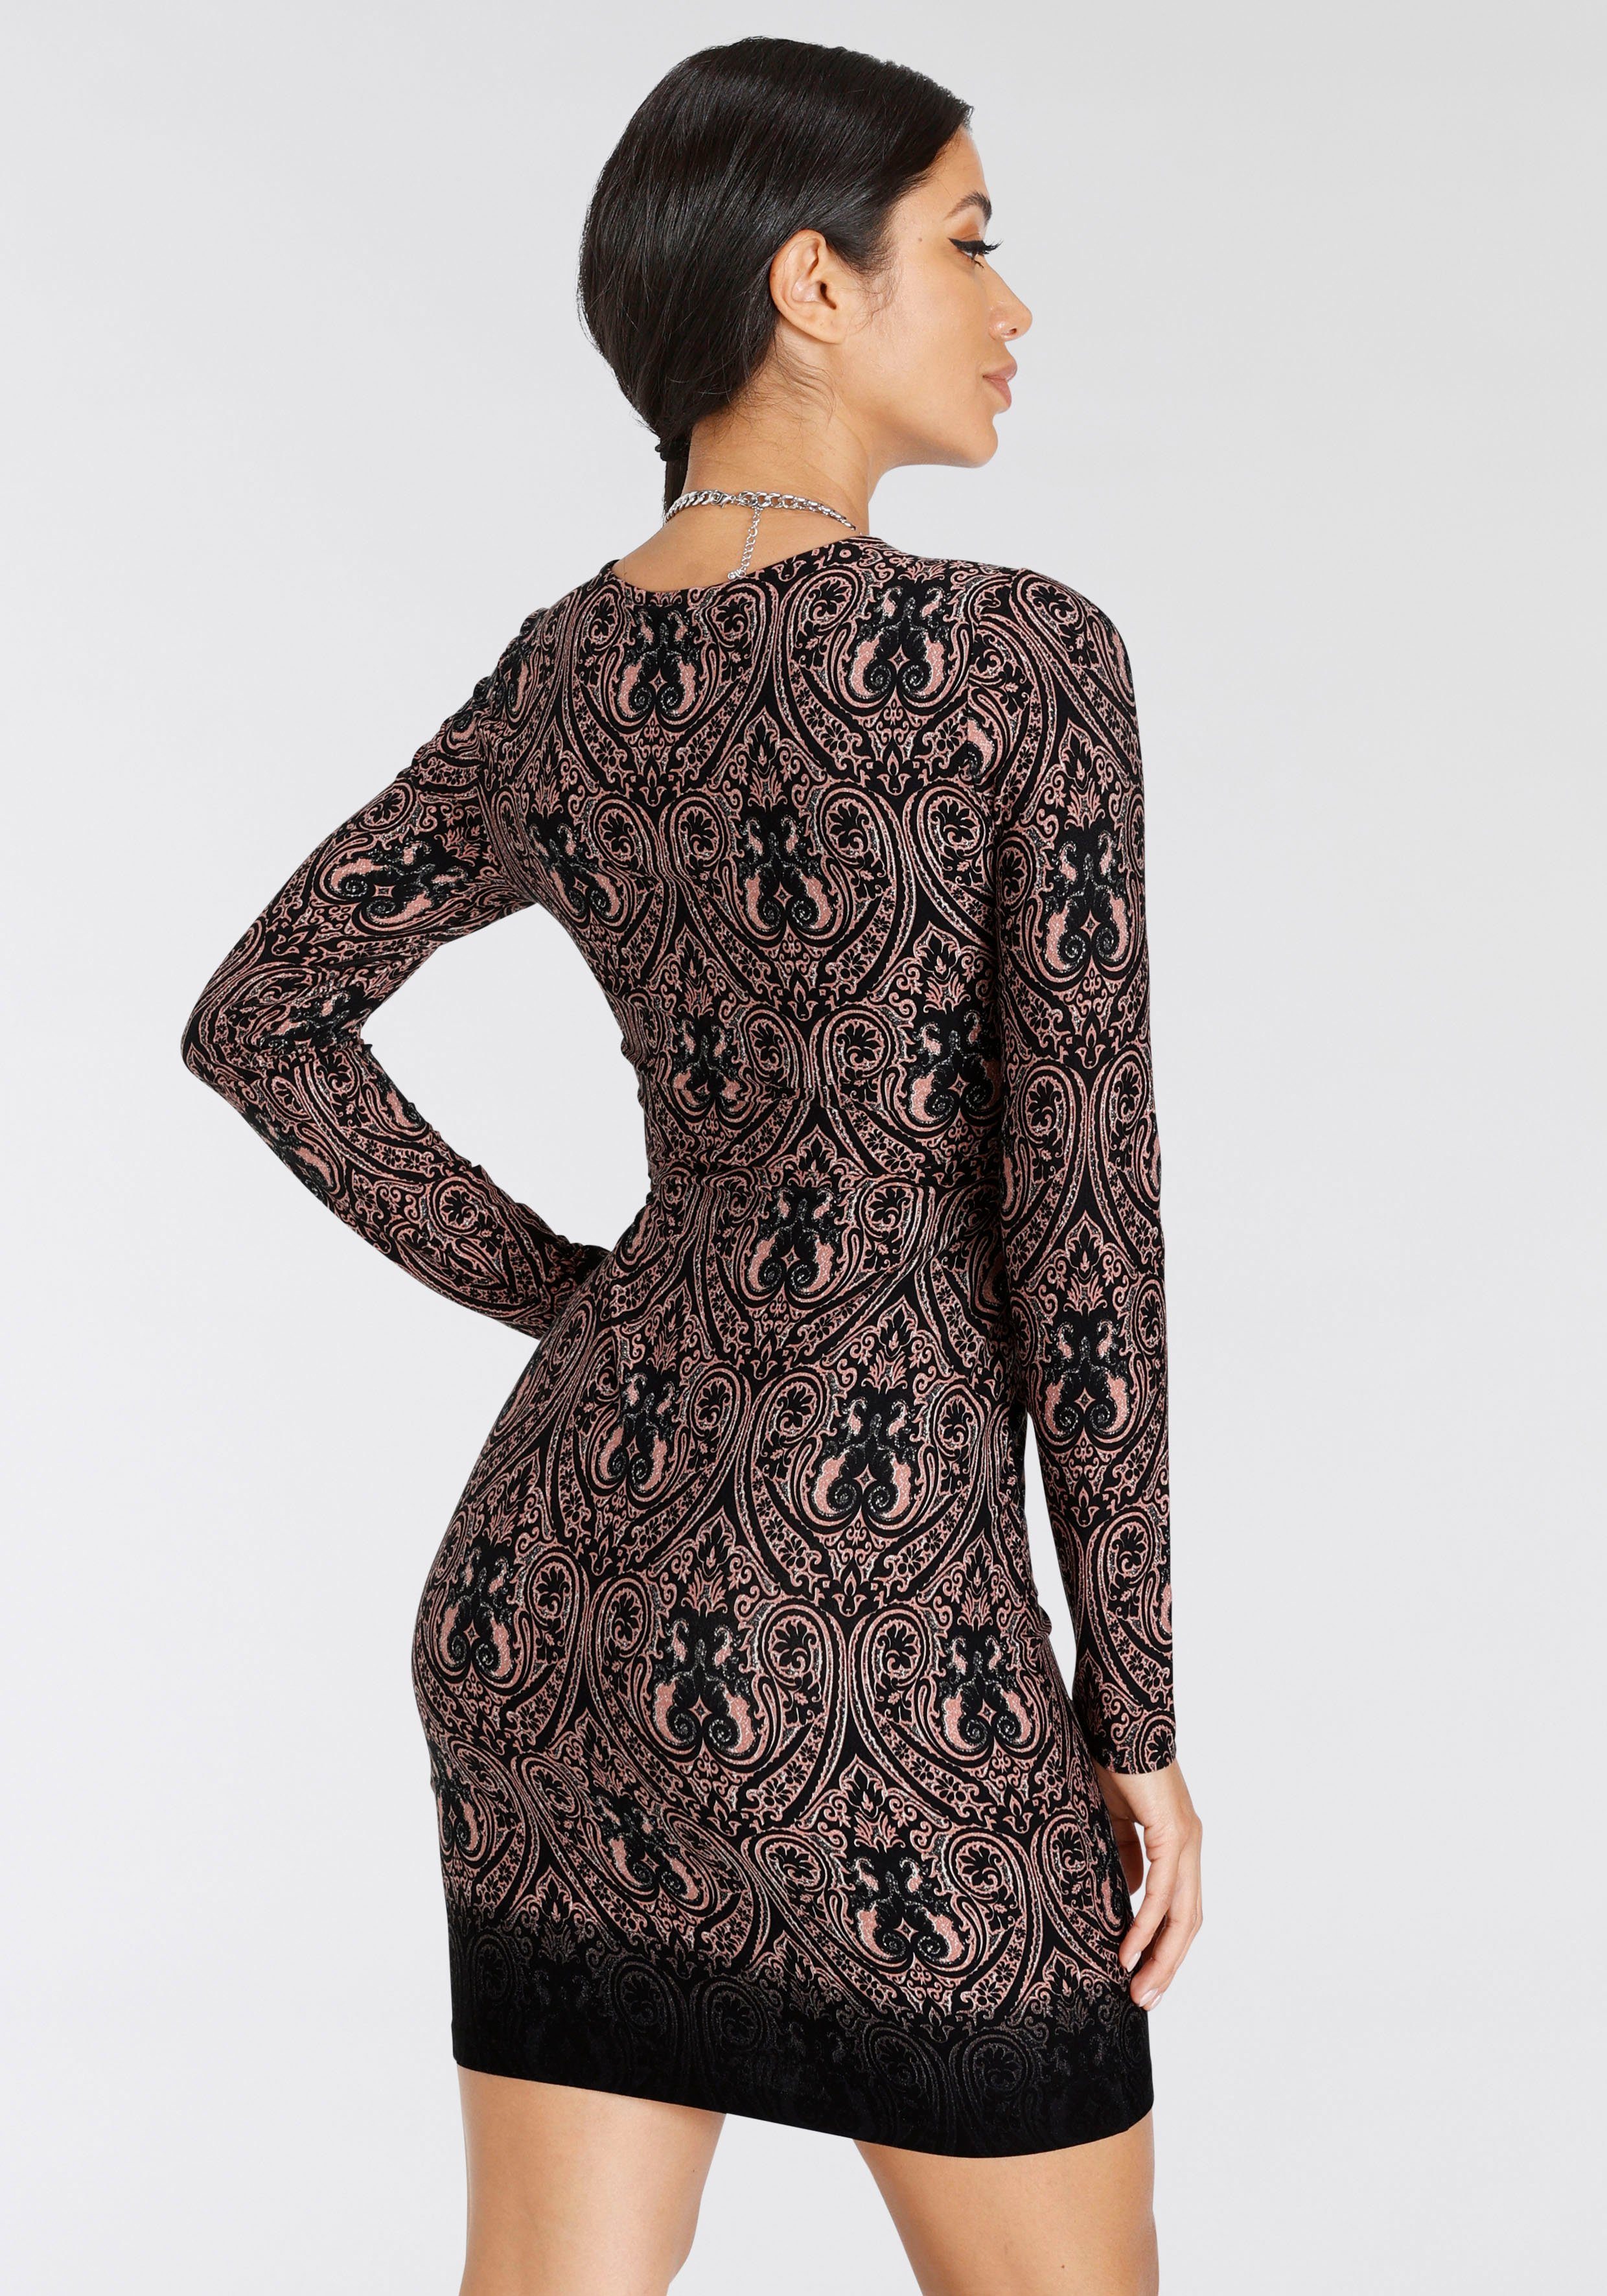 Melrose Jerseykleid mit Cut-Out Paisley-Muster und